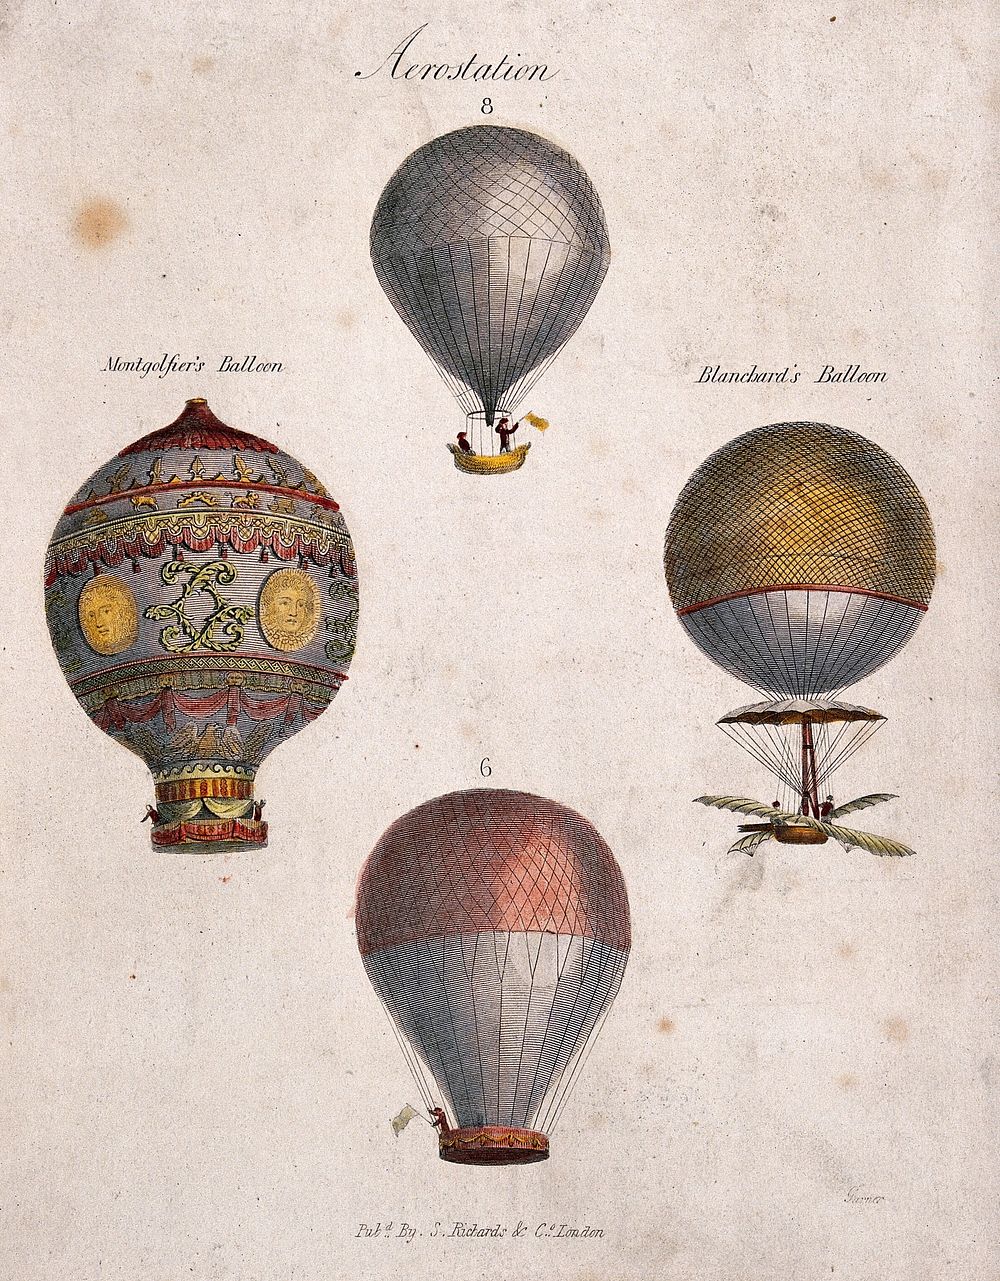 Ballooning: four figures. Coloured engraving by Garner.